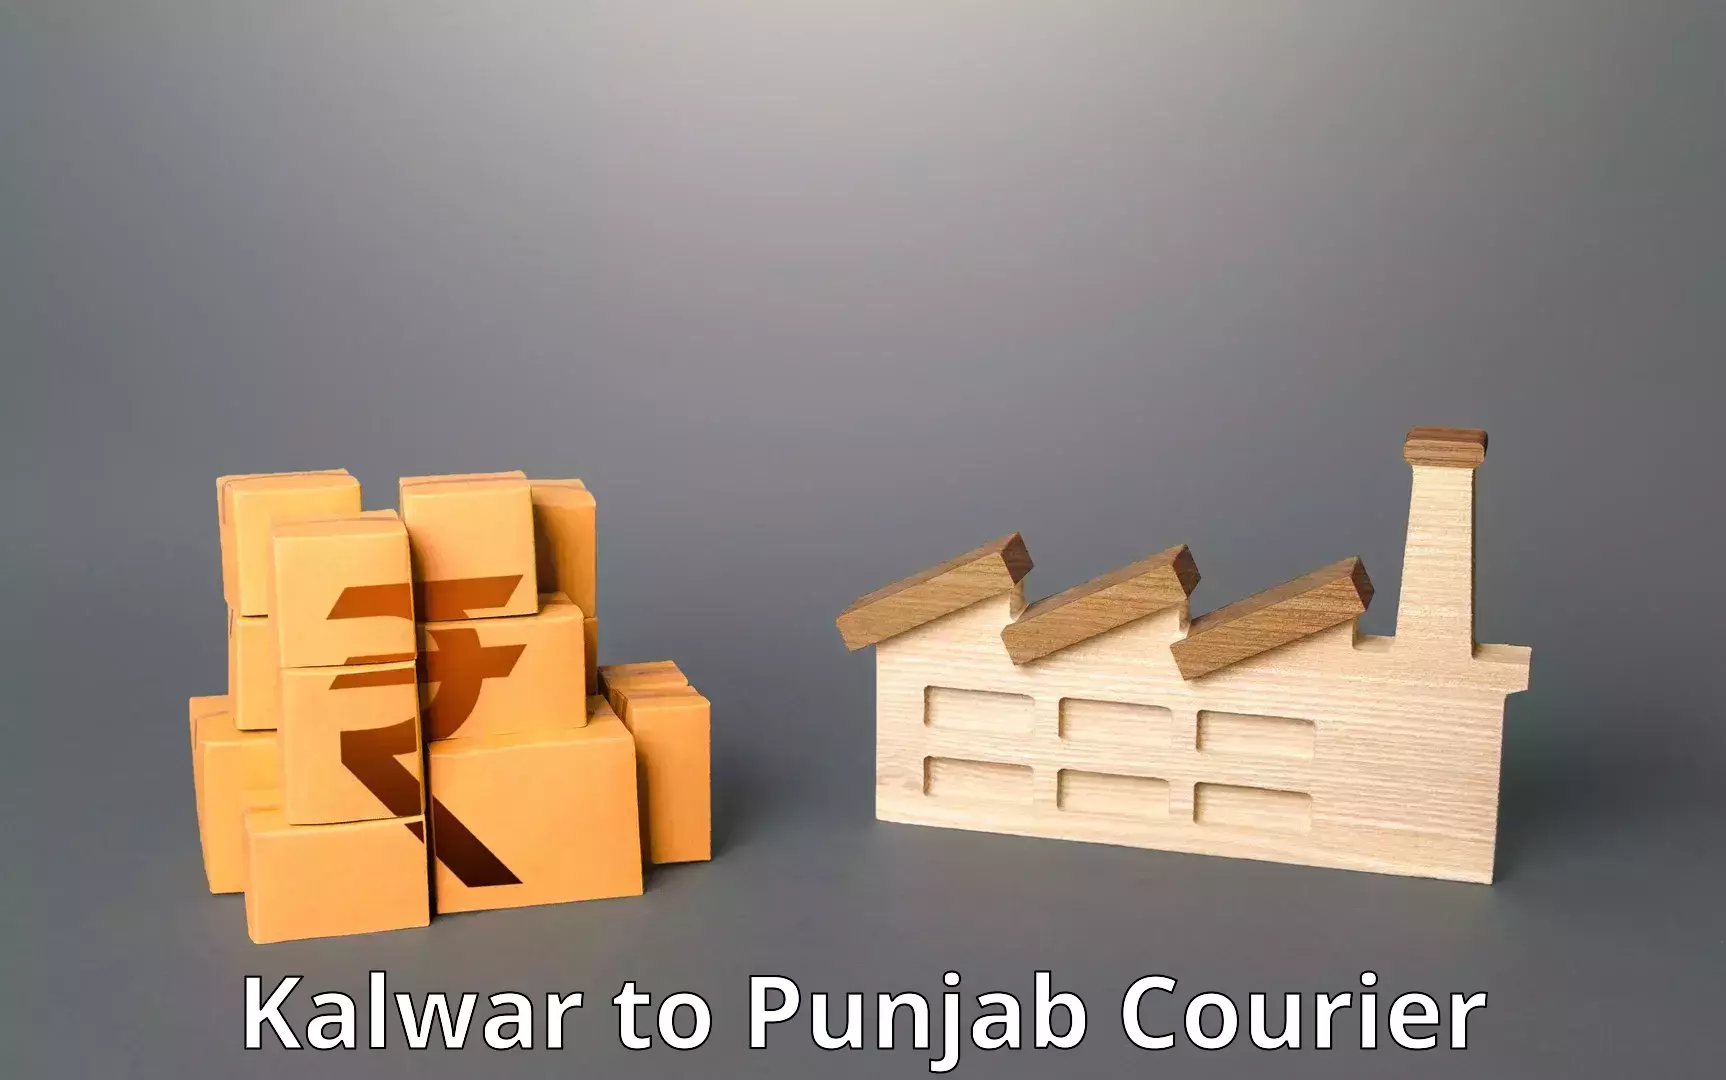 Streamlined delivery processes in Kalwar to Amritsar